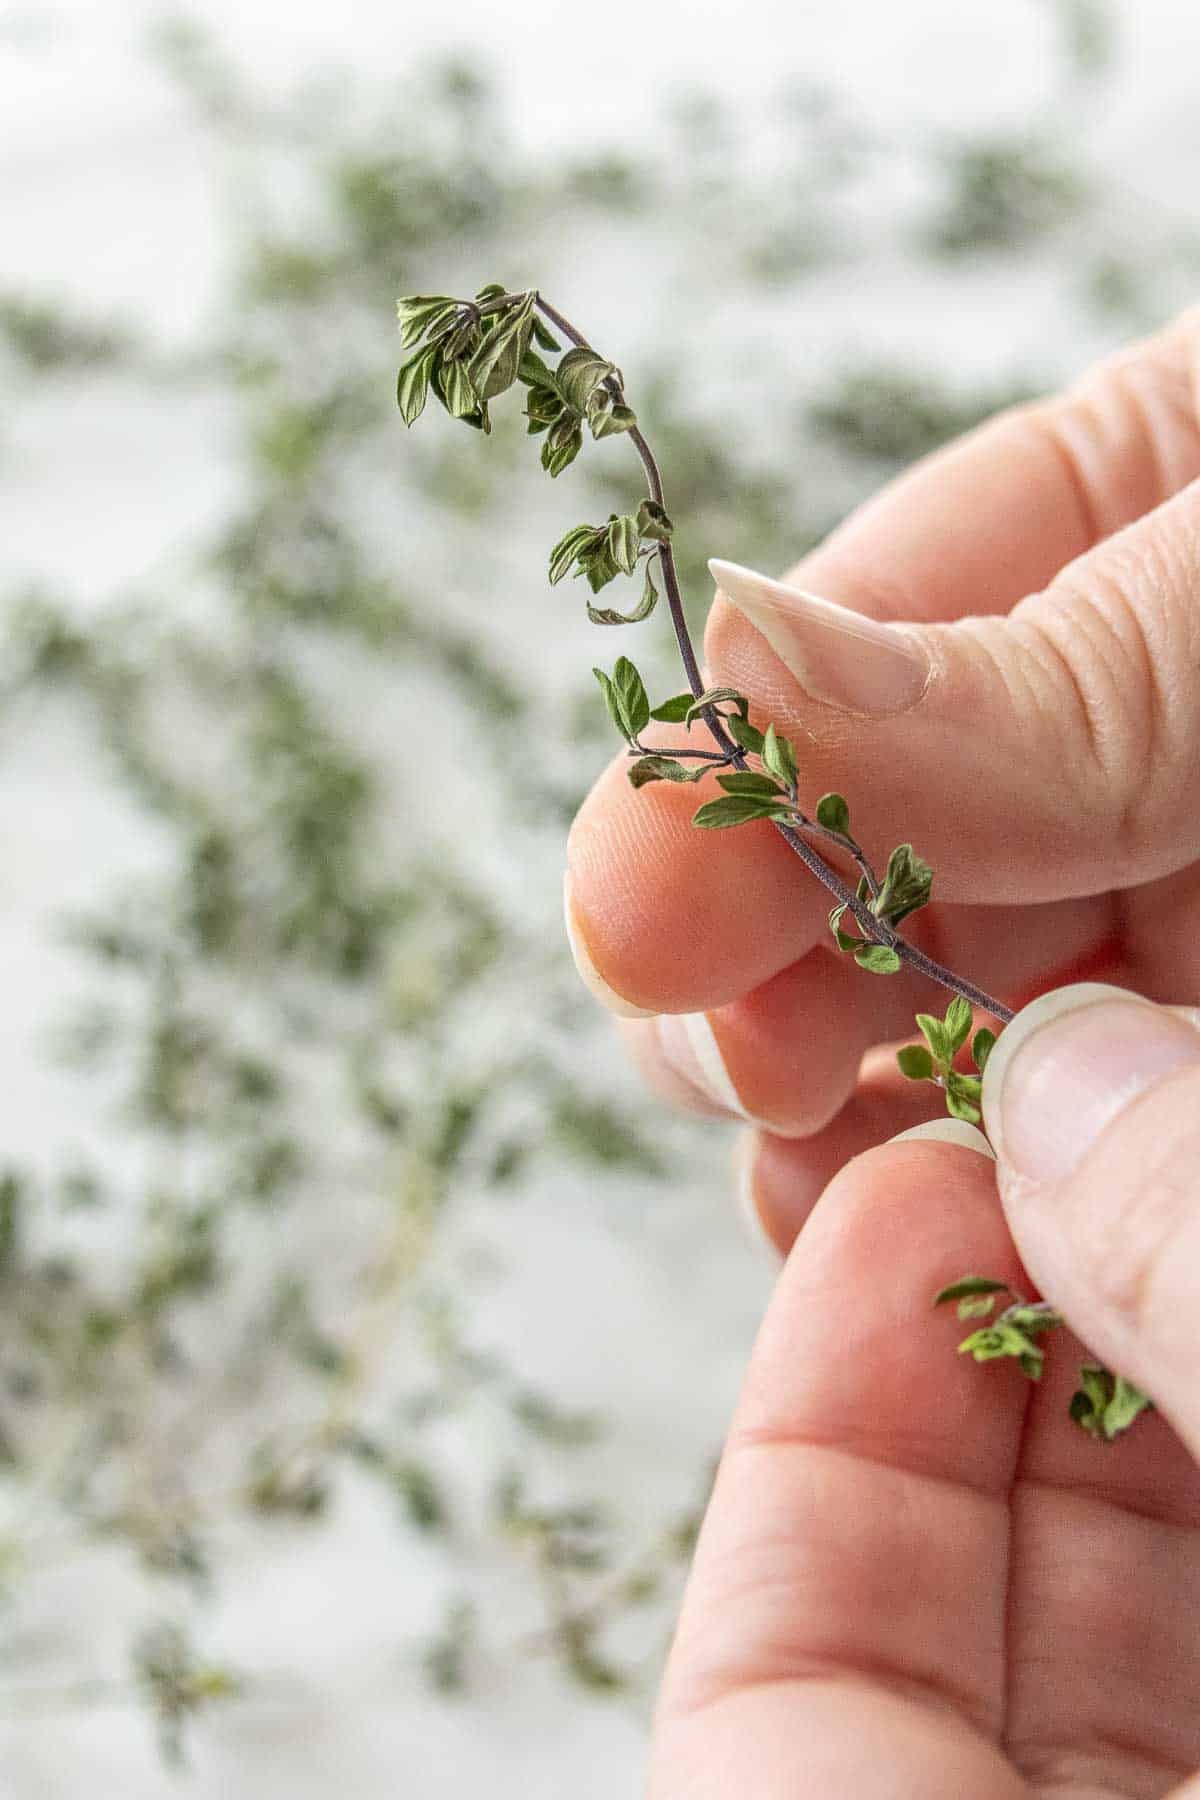 Hands holding up a sprig of dried thyme.